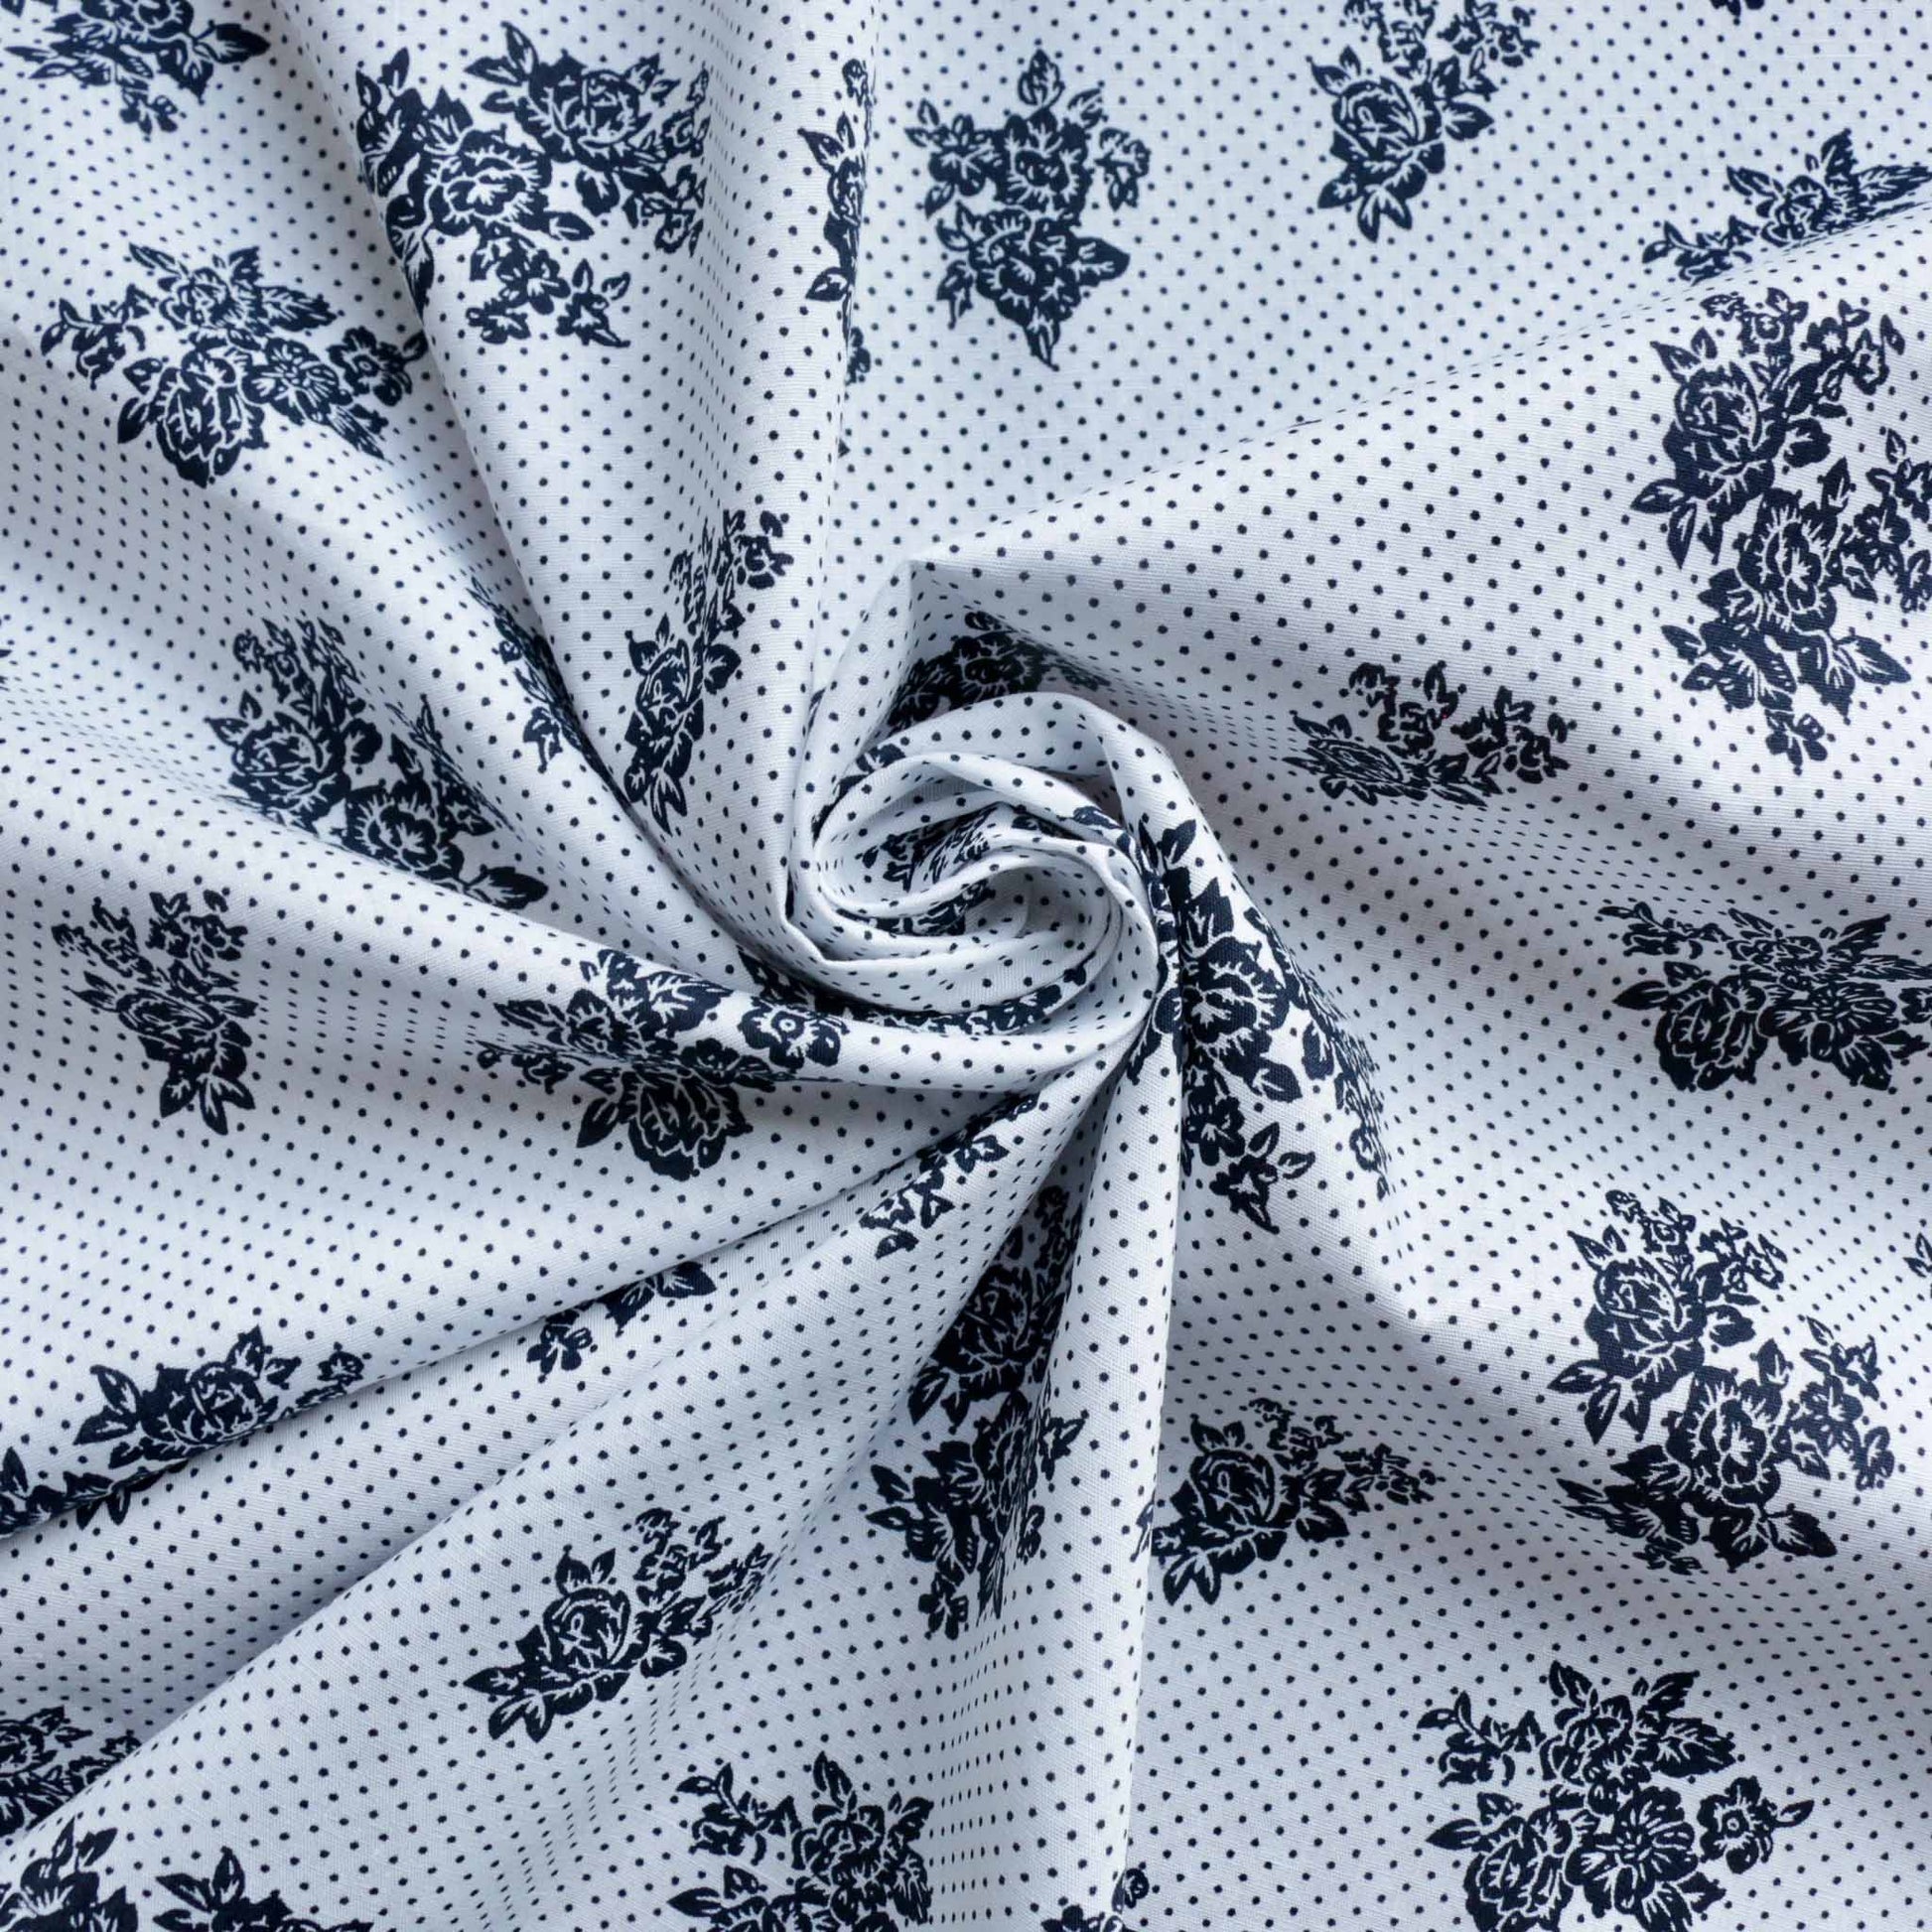 navy dots and flower design on white cotton dressmaking fabric